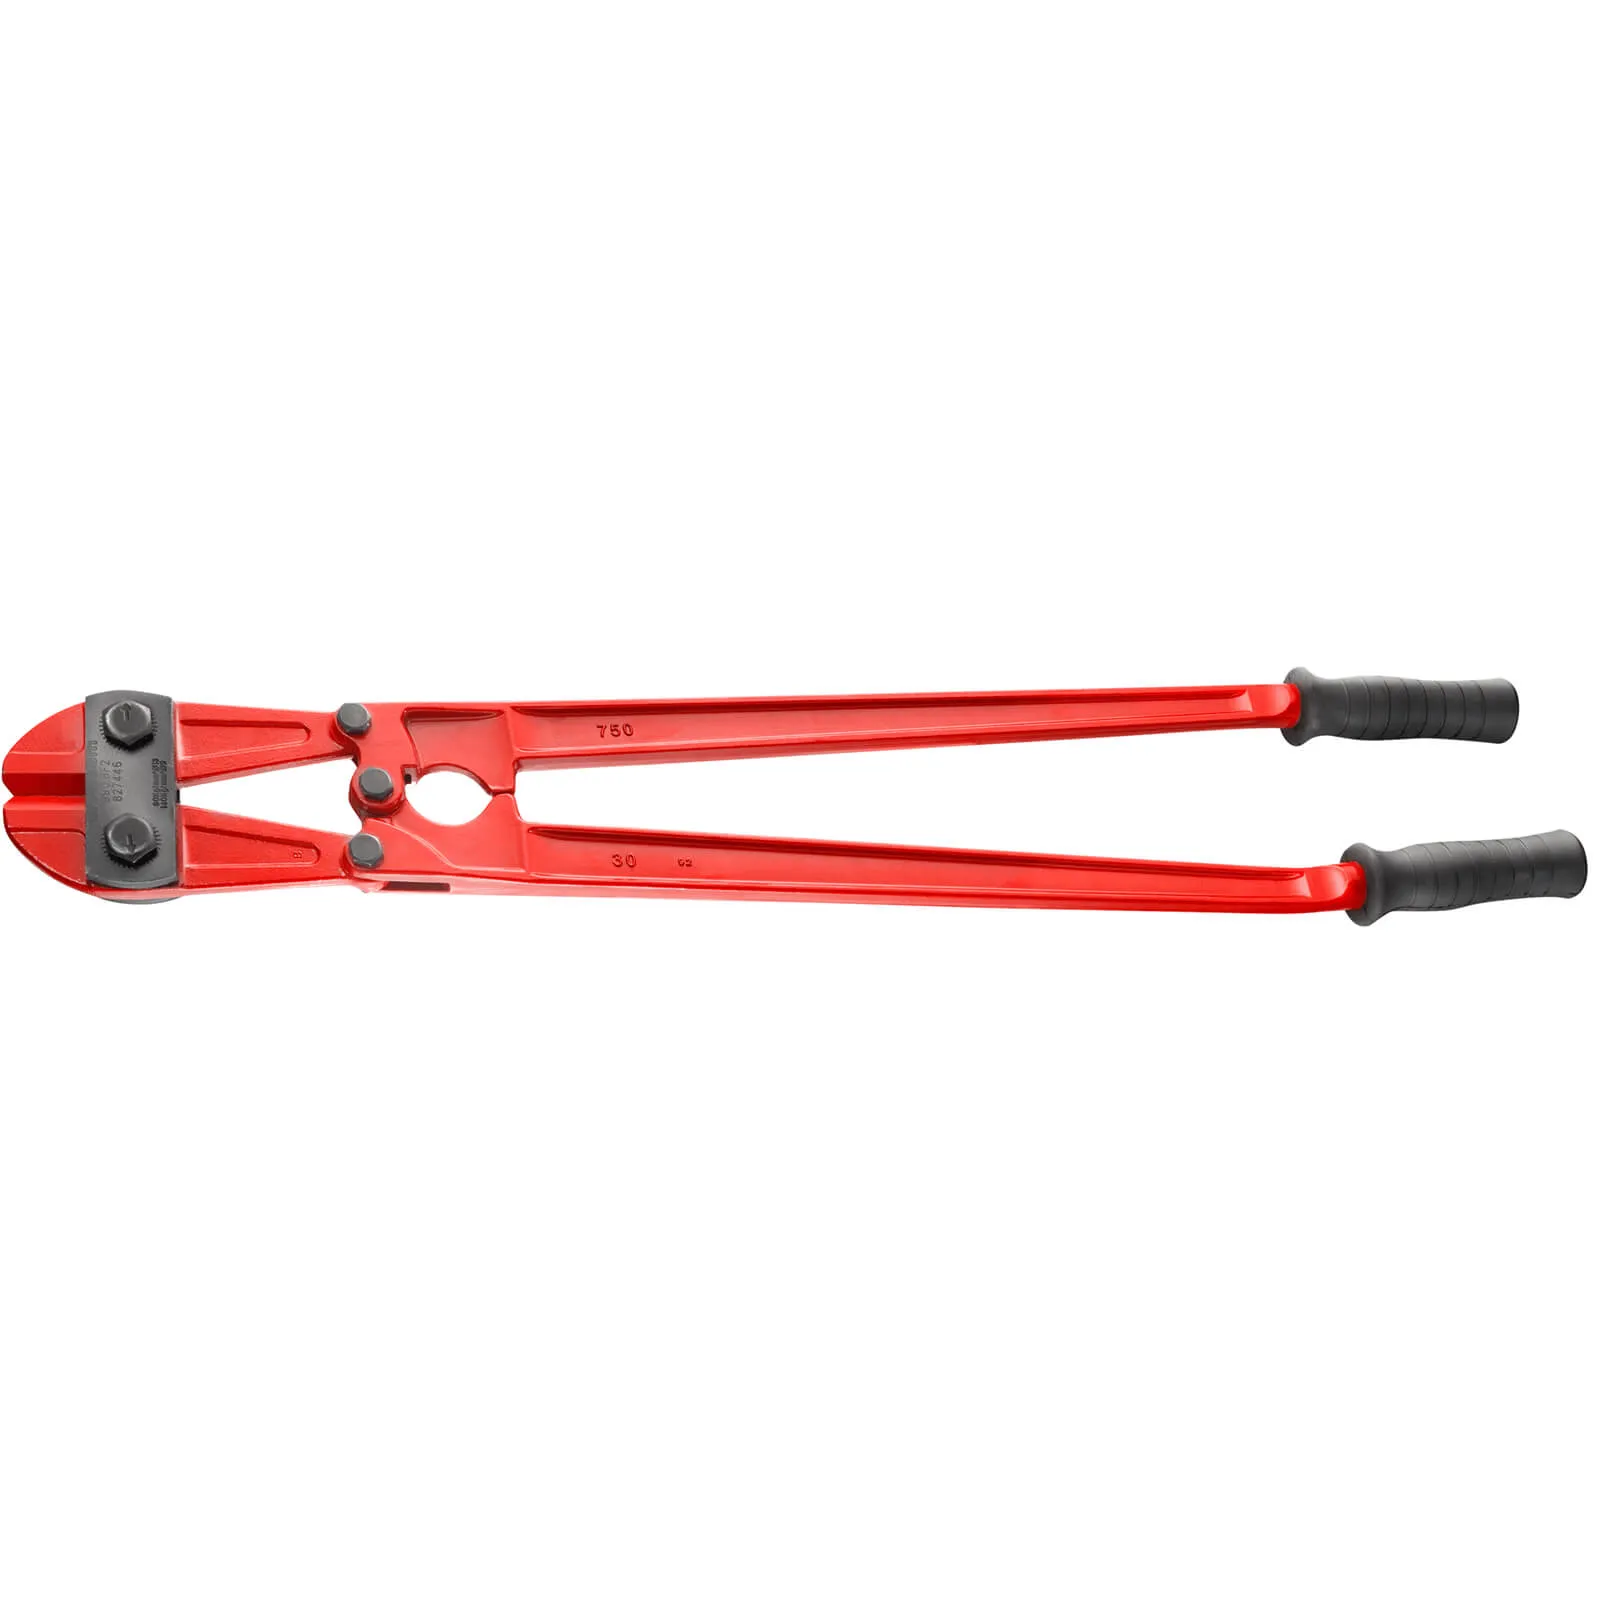 Facom 990BF Forged Axial Cut Bolt Cutters - 450mm